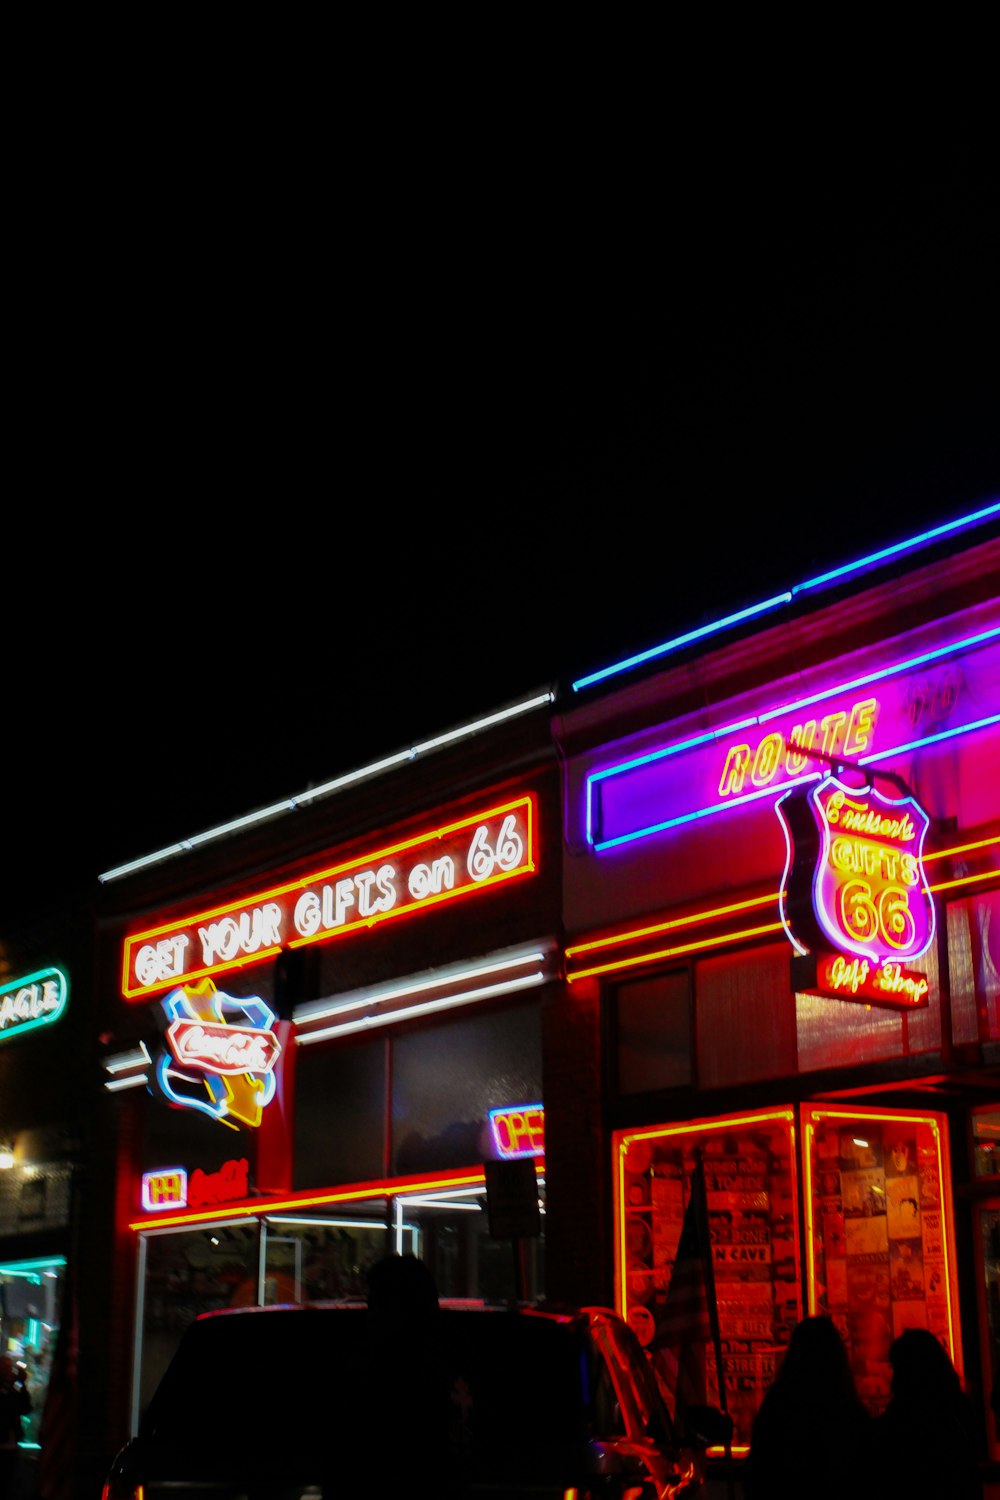 a building with neon lights and a car parked in front of it